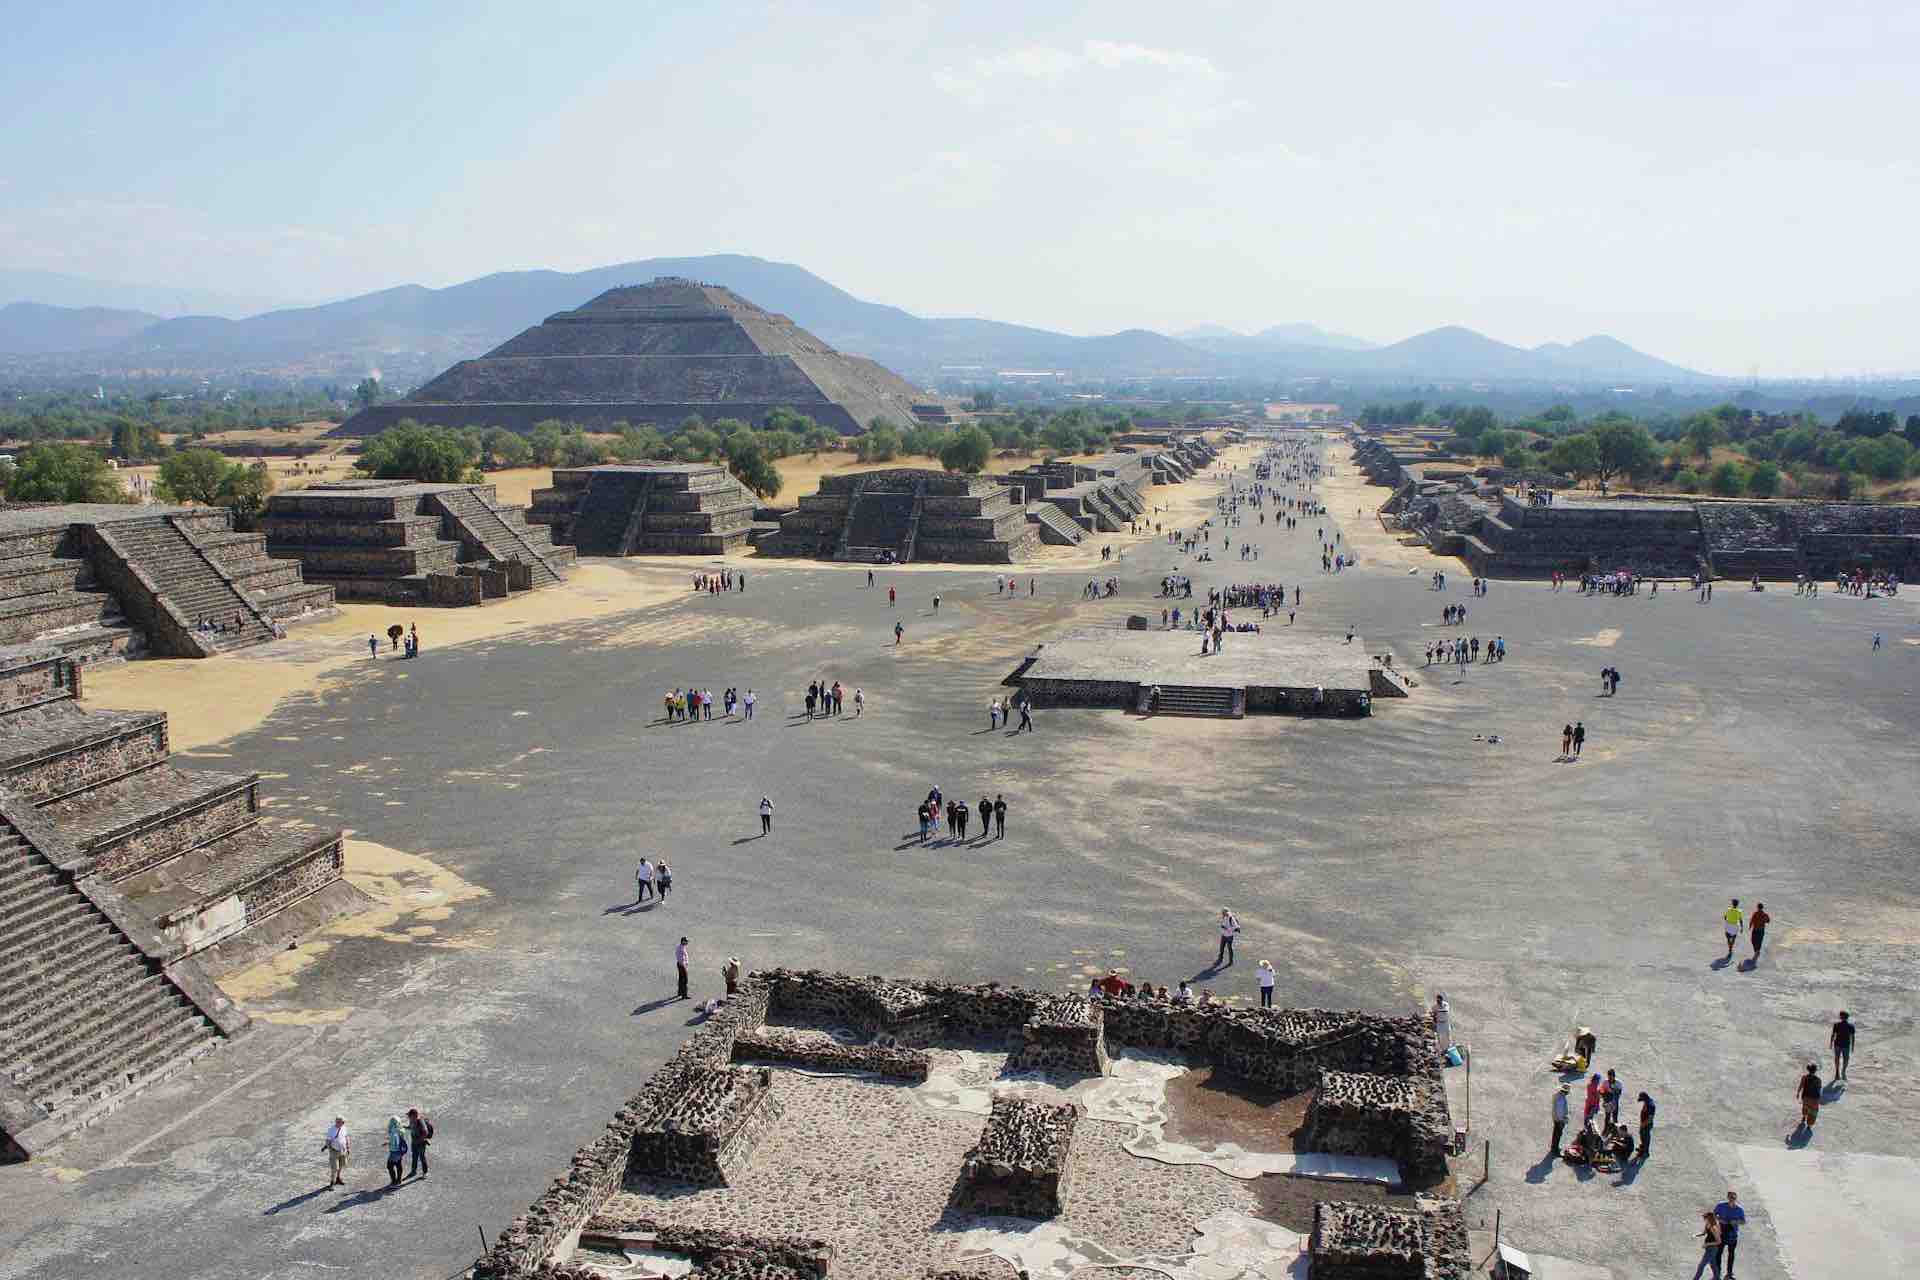 Teotihuacán archeological site